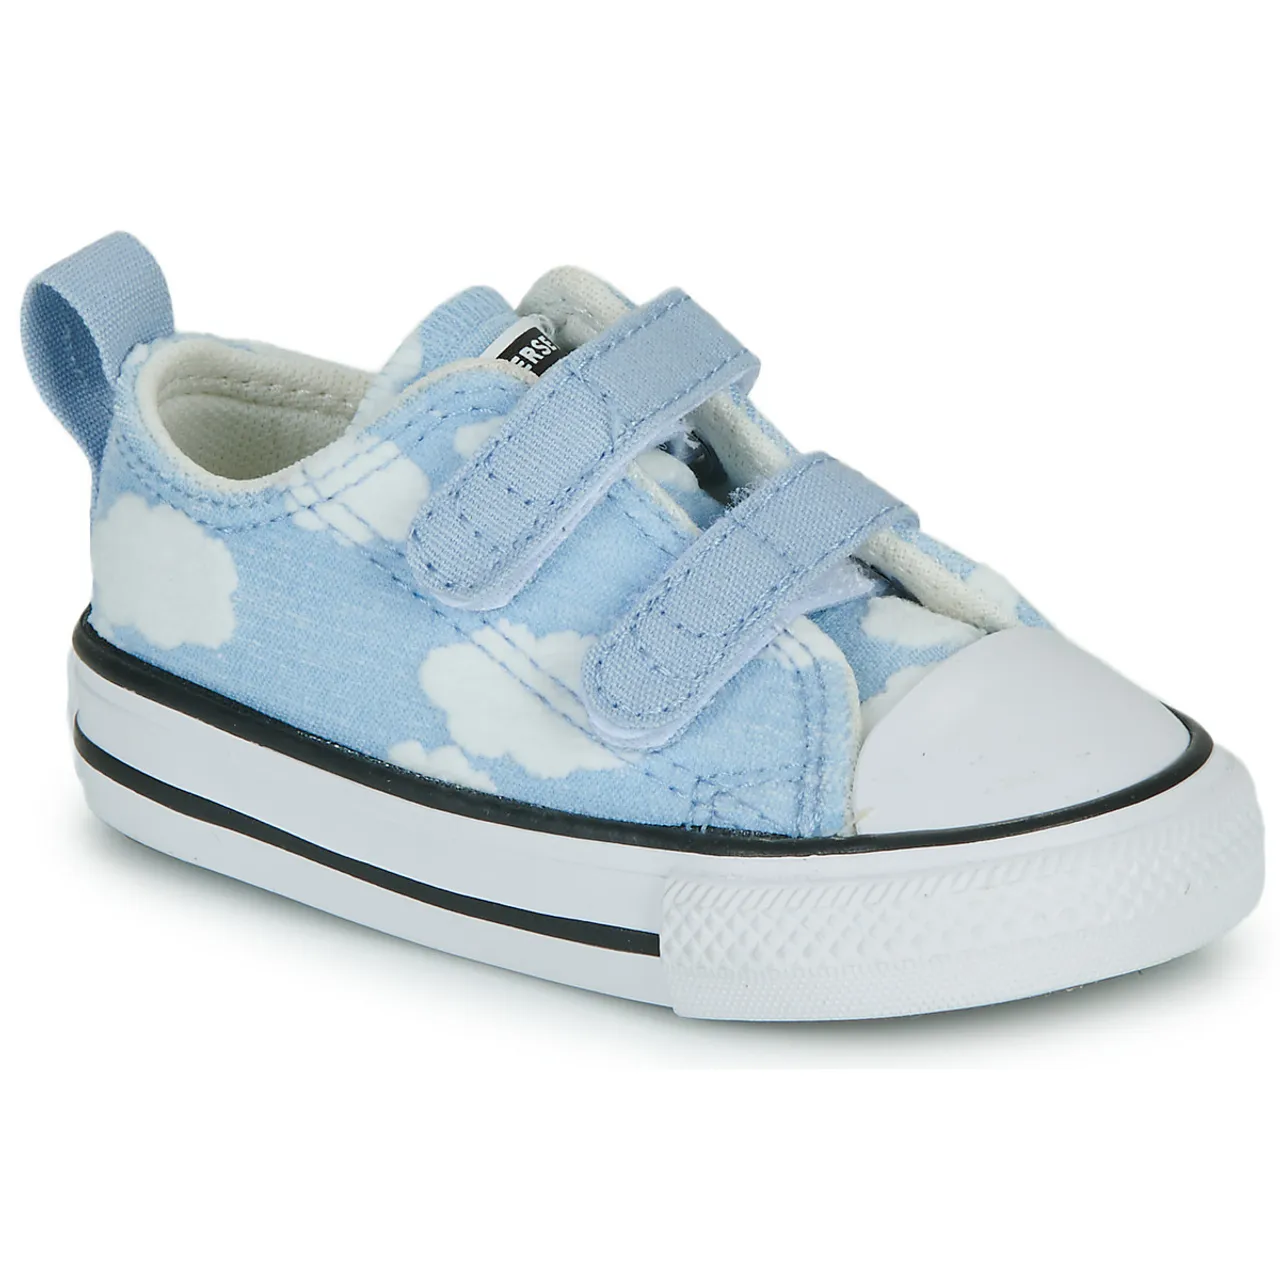 Converse  CHUCK TAYLOR ALL STAR 2V OX  boys's Children's Shoes (Trainers) in Blue